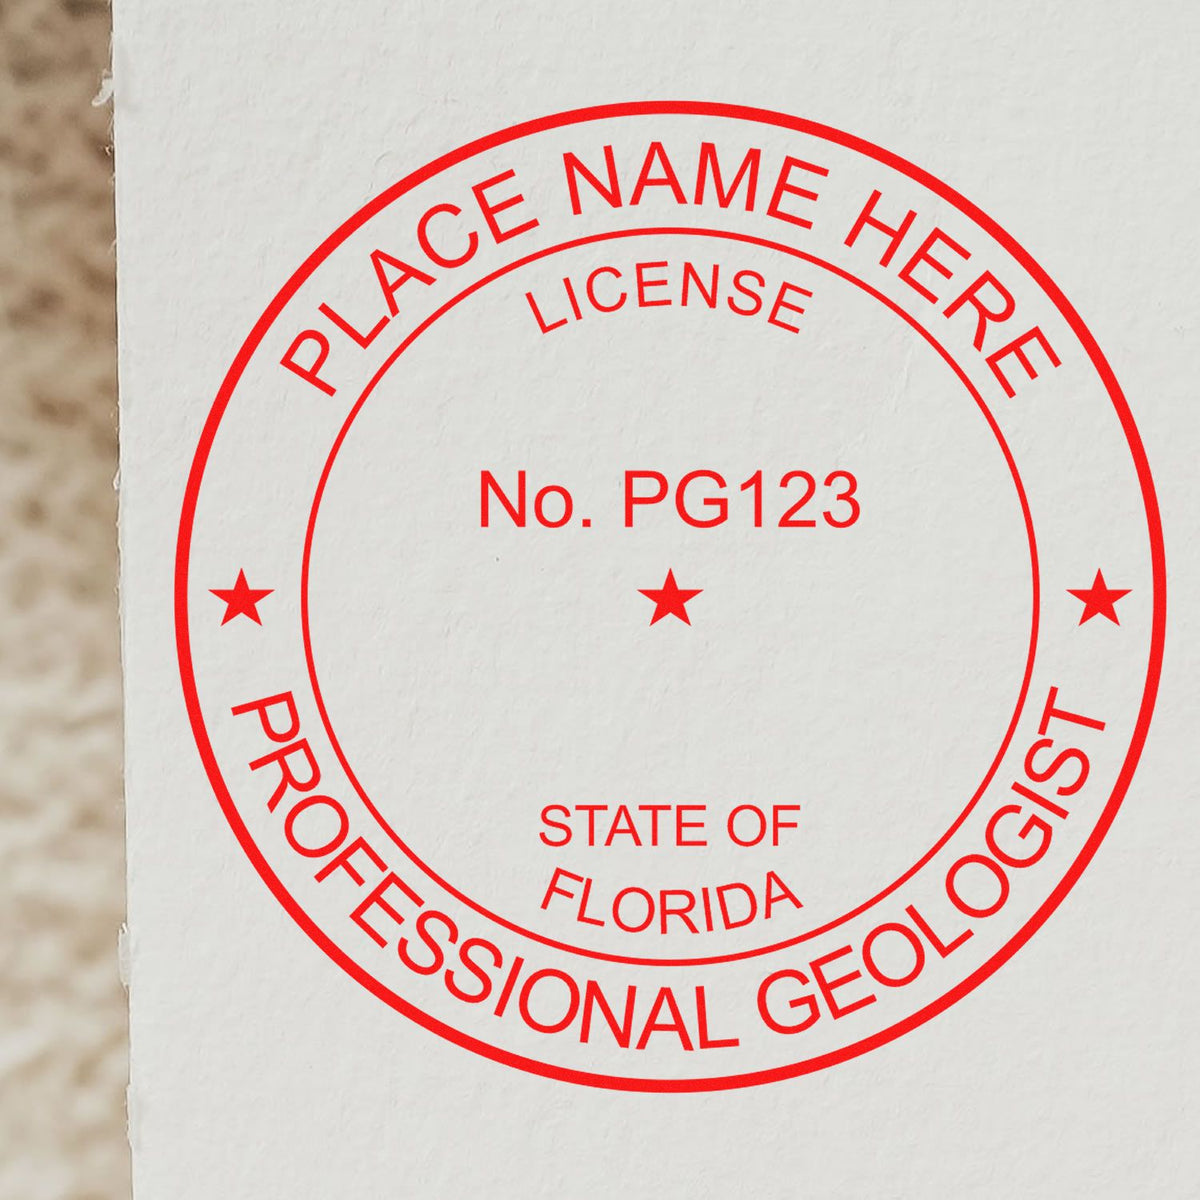 An in use photo of the Florida Professional Geologist Seal Stamp showing a sample imprint on a cardstock